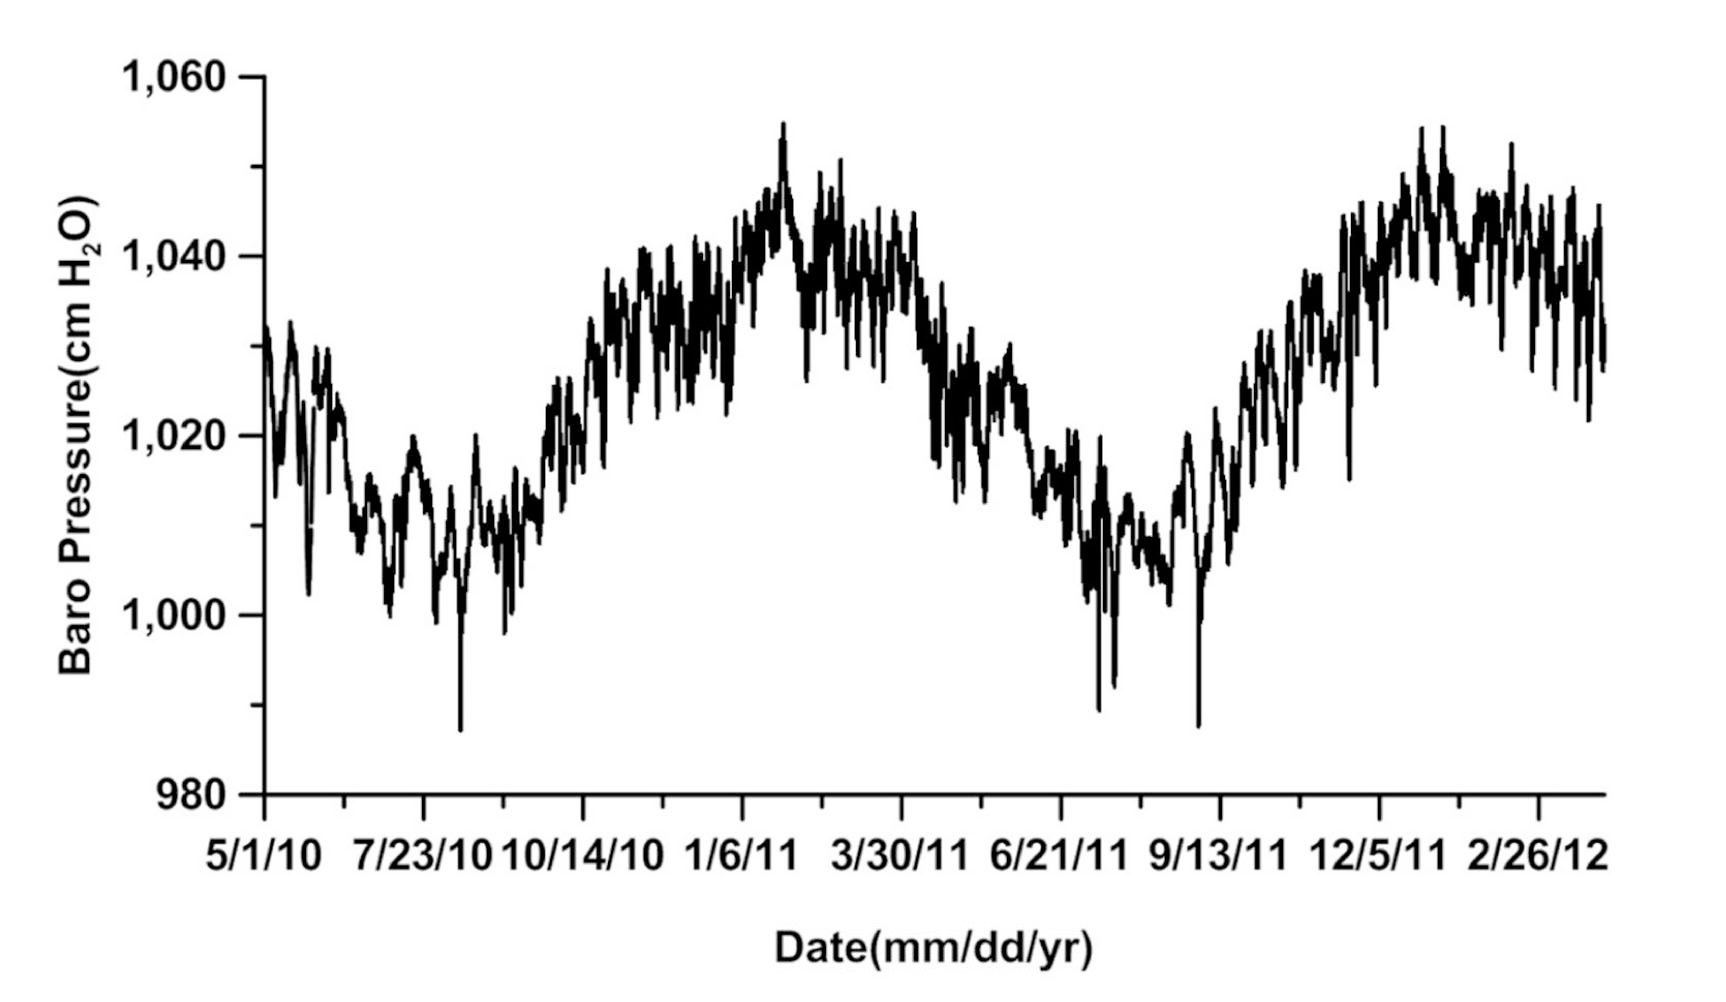 Barometric Pressure Data Recorded from May 1, 2010 to March 31, 2012